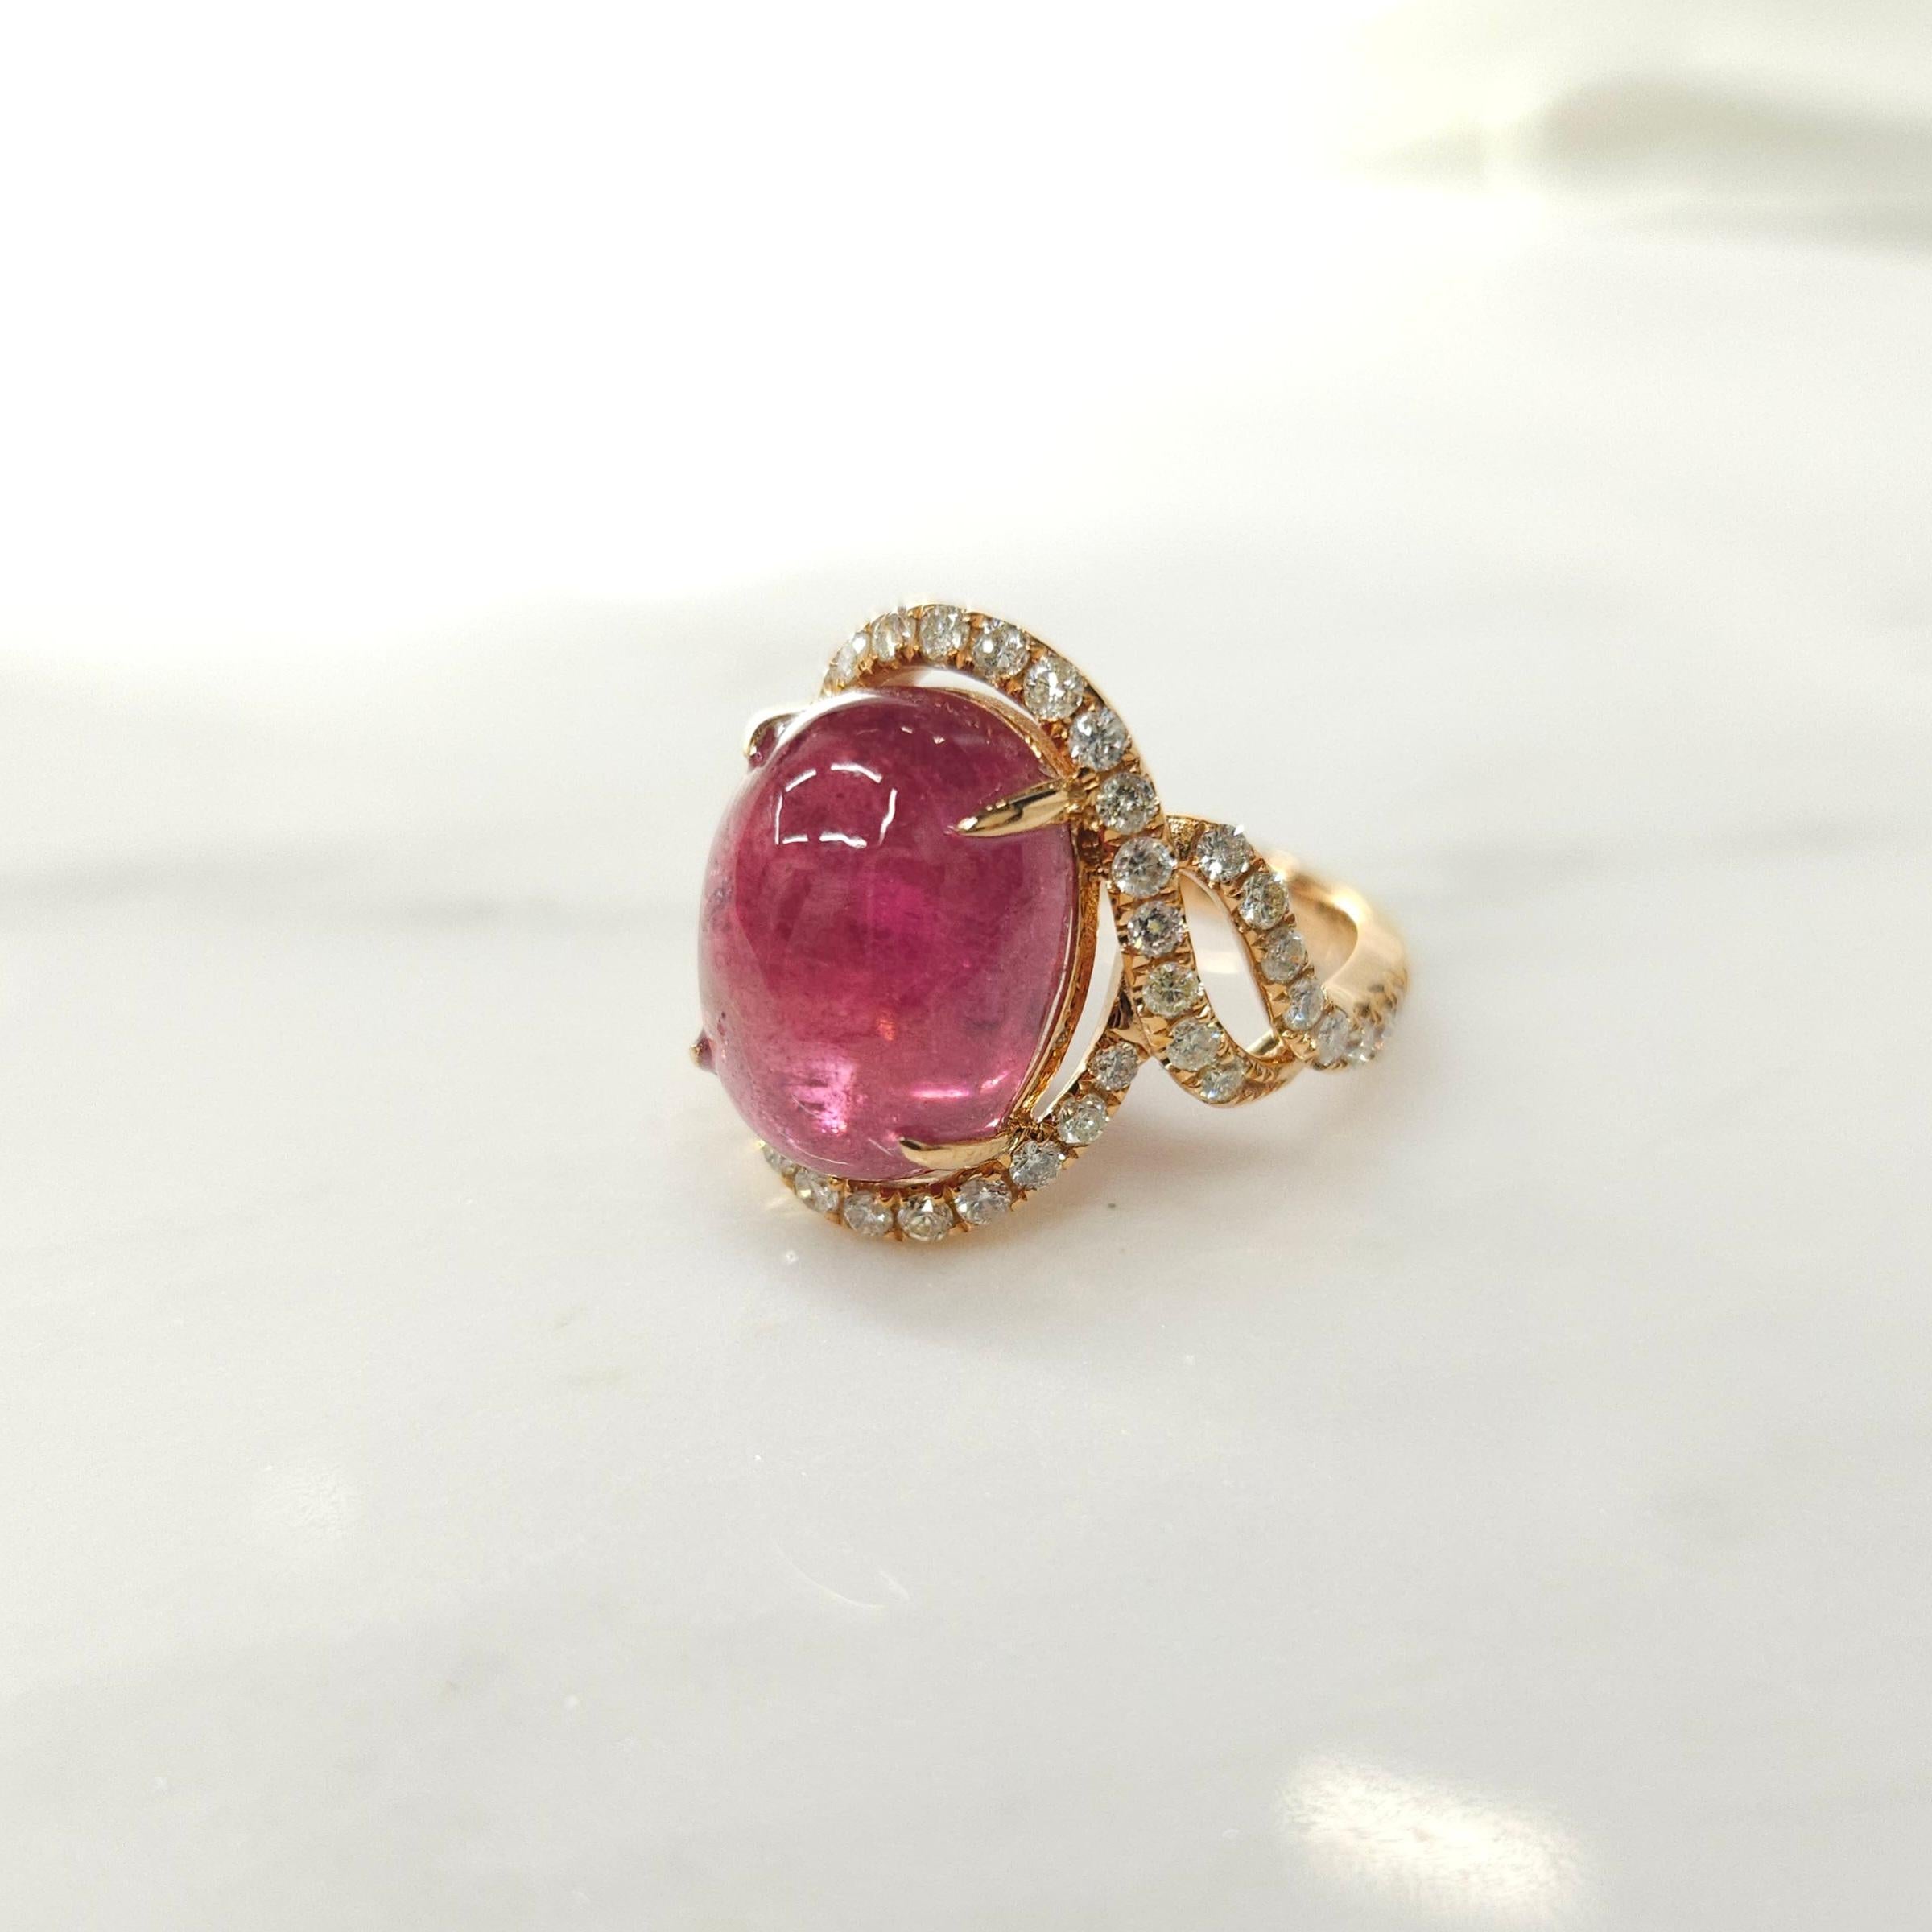 Introducing a breathtaking piece of jewelry featuring a dazzling IGI Certified 9.10 Carat Tourmaline in a striking intense purplish pink color. The oval-shaped tourmaline takes center stage in this modern style ring crafted from 18K White Gold and